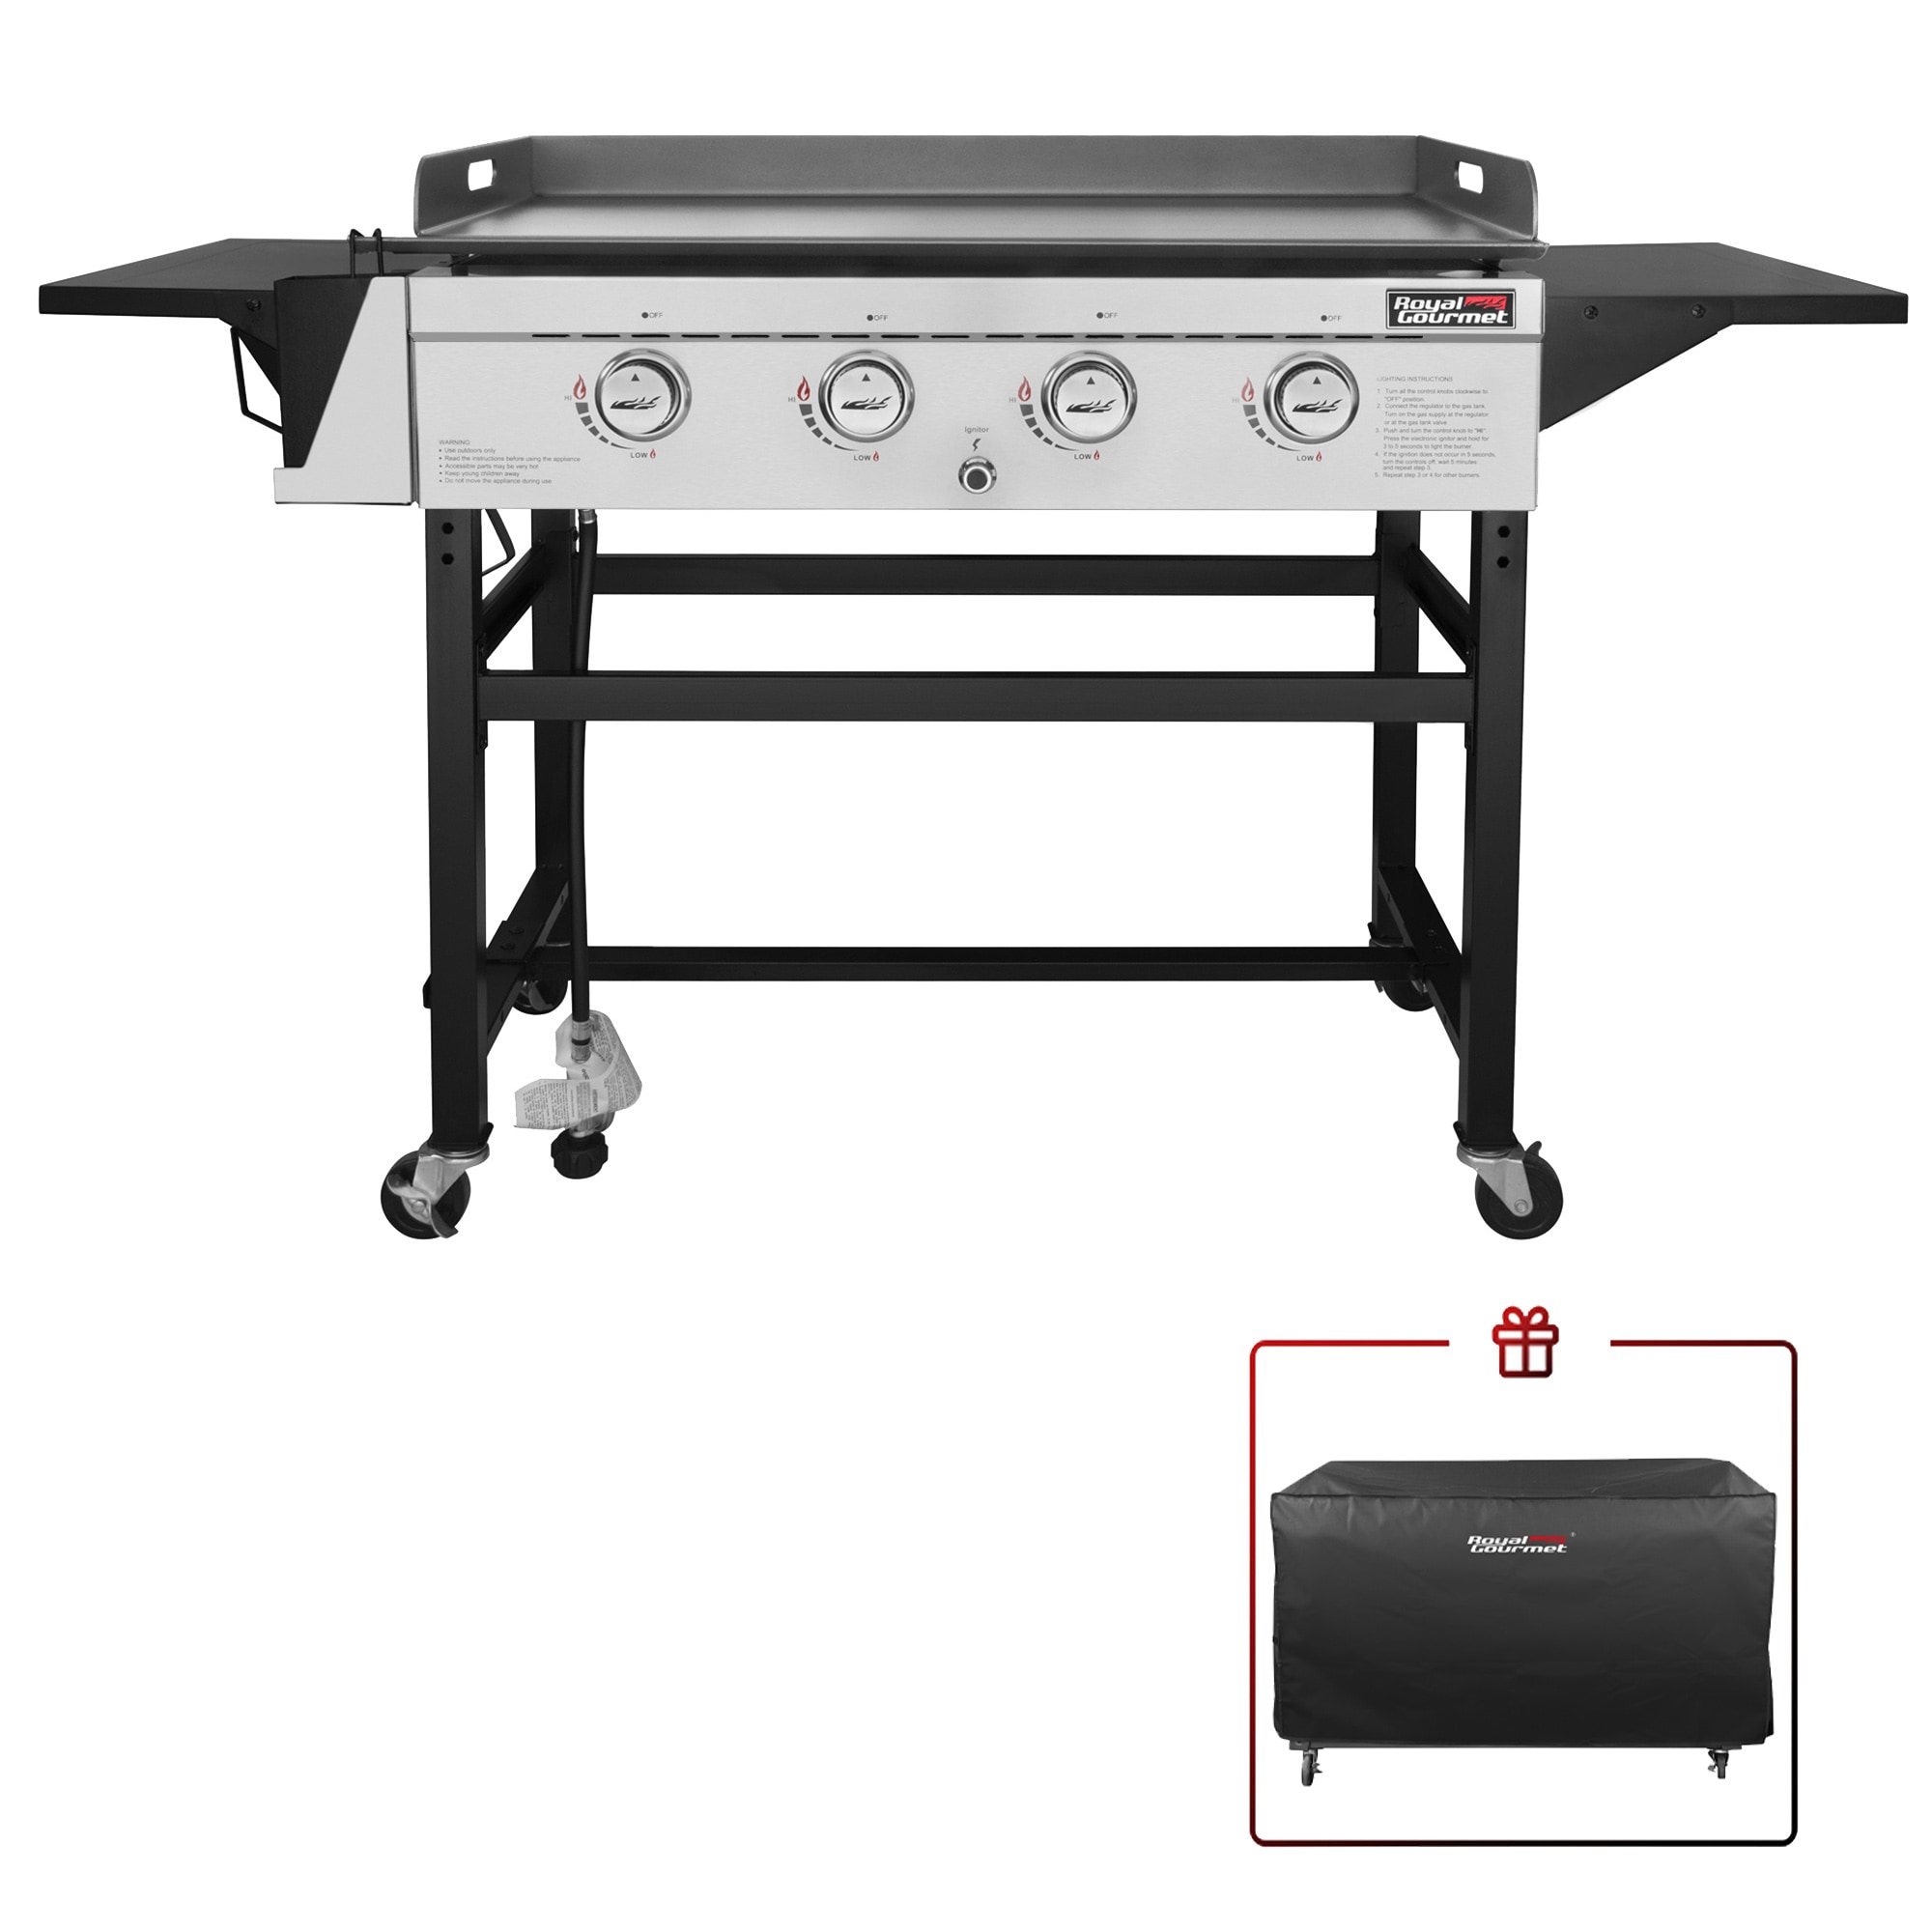 YouYeap 4 Burner Propane Gas Grill Flat Top Griddle Grill, Black 